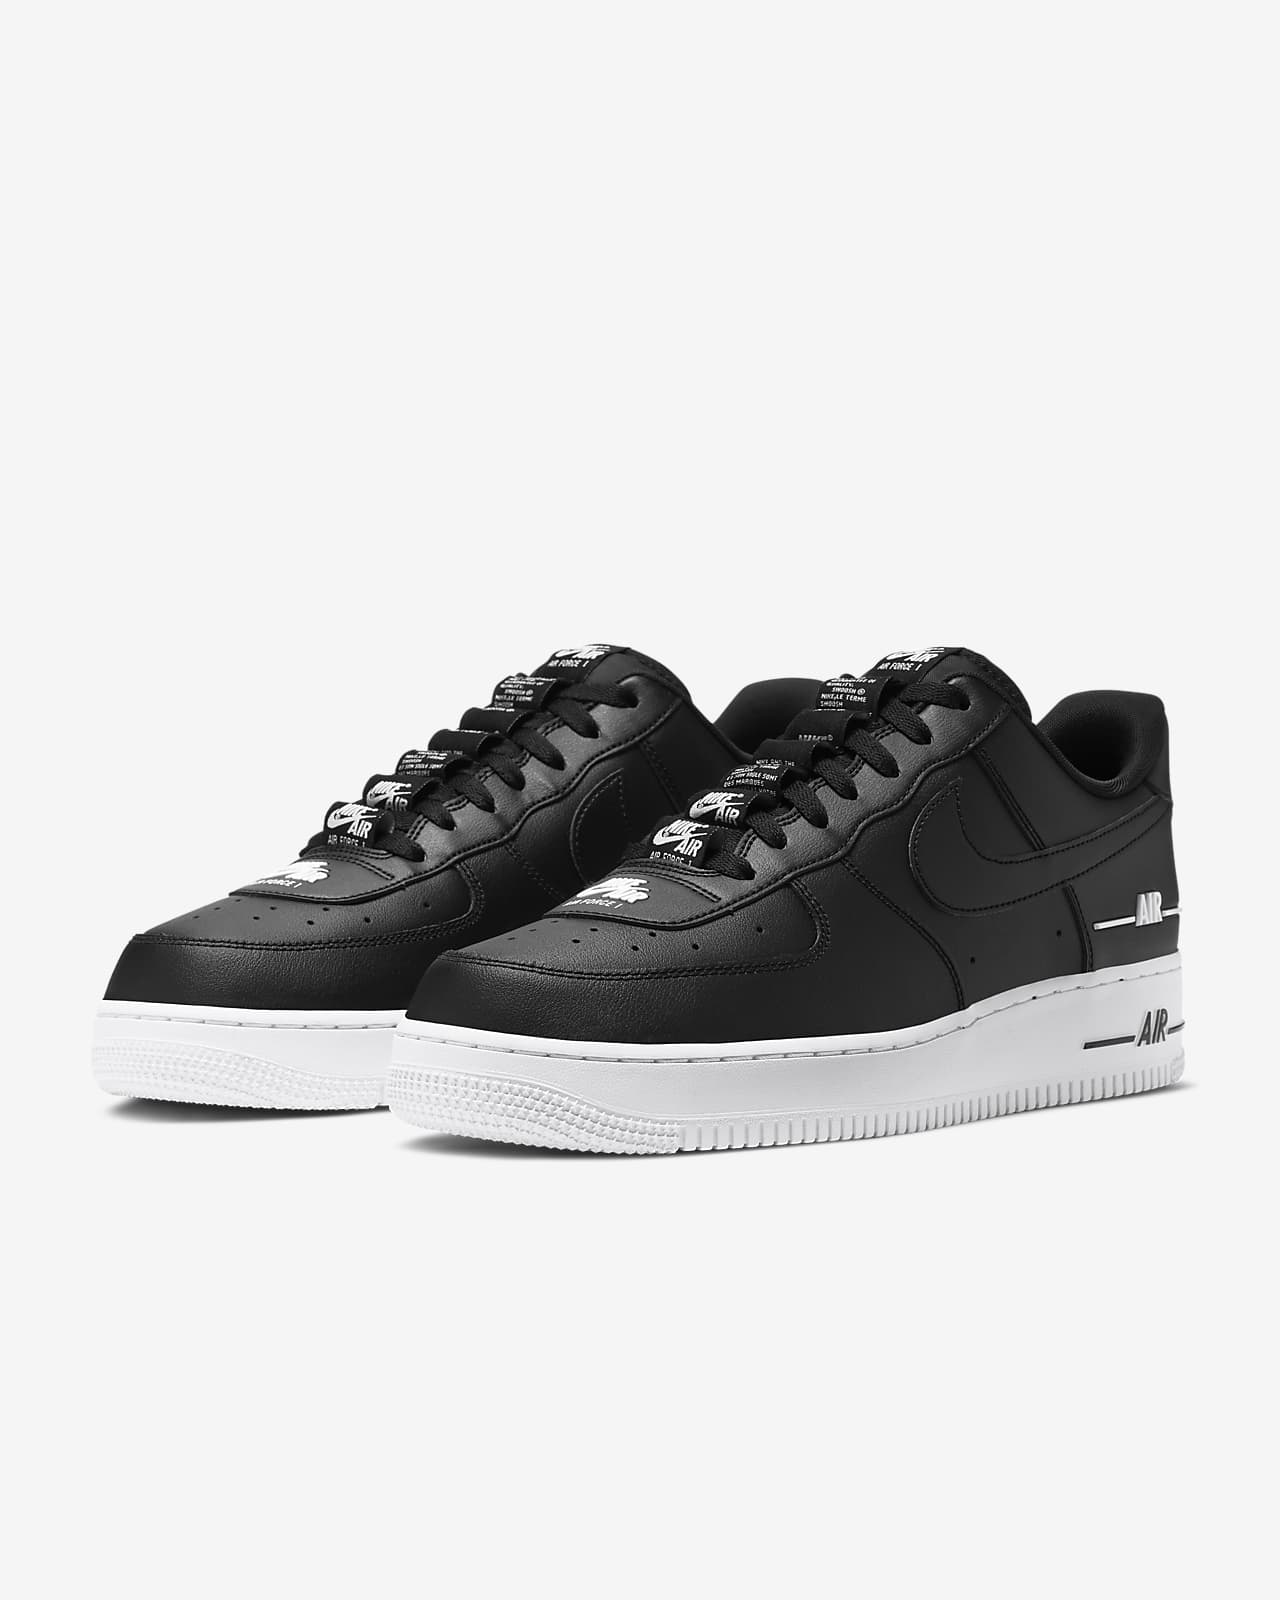 high top nike air force 1 black and white